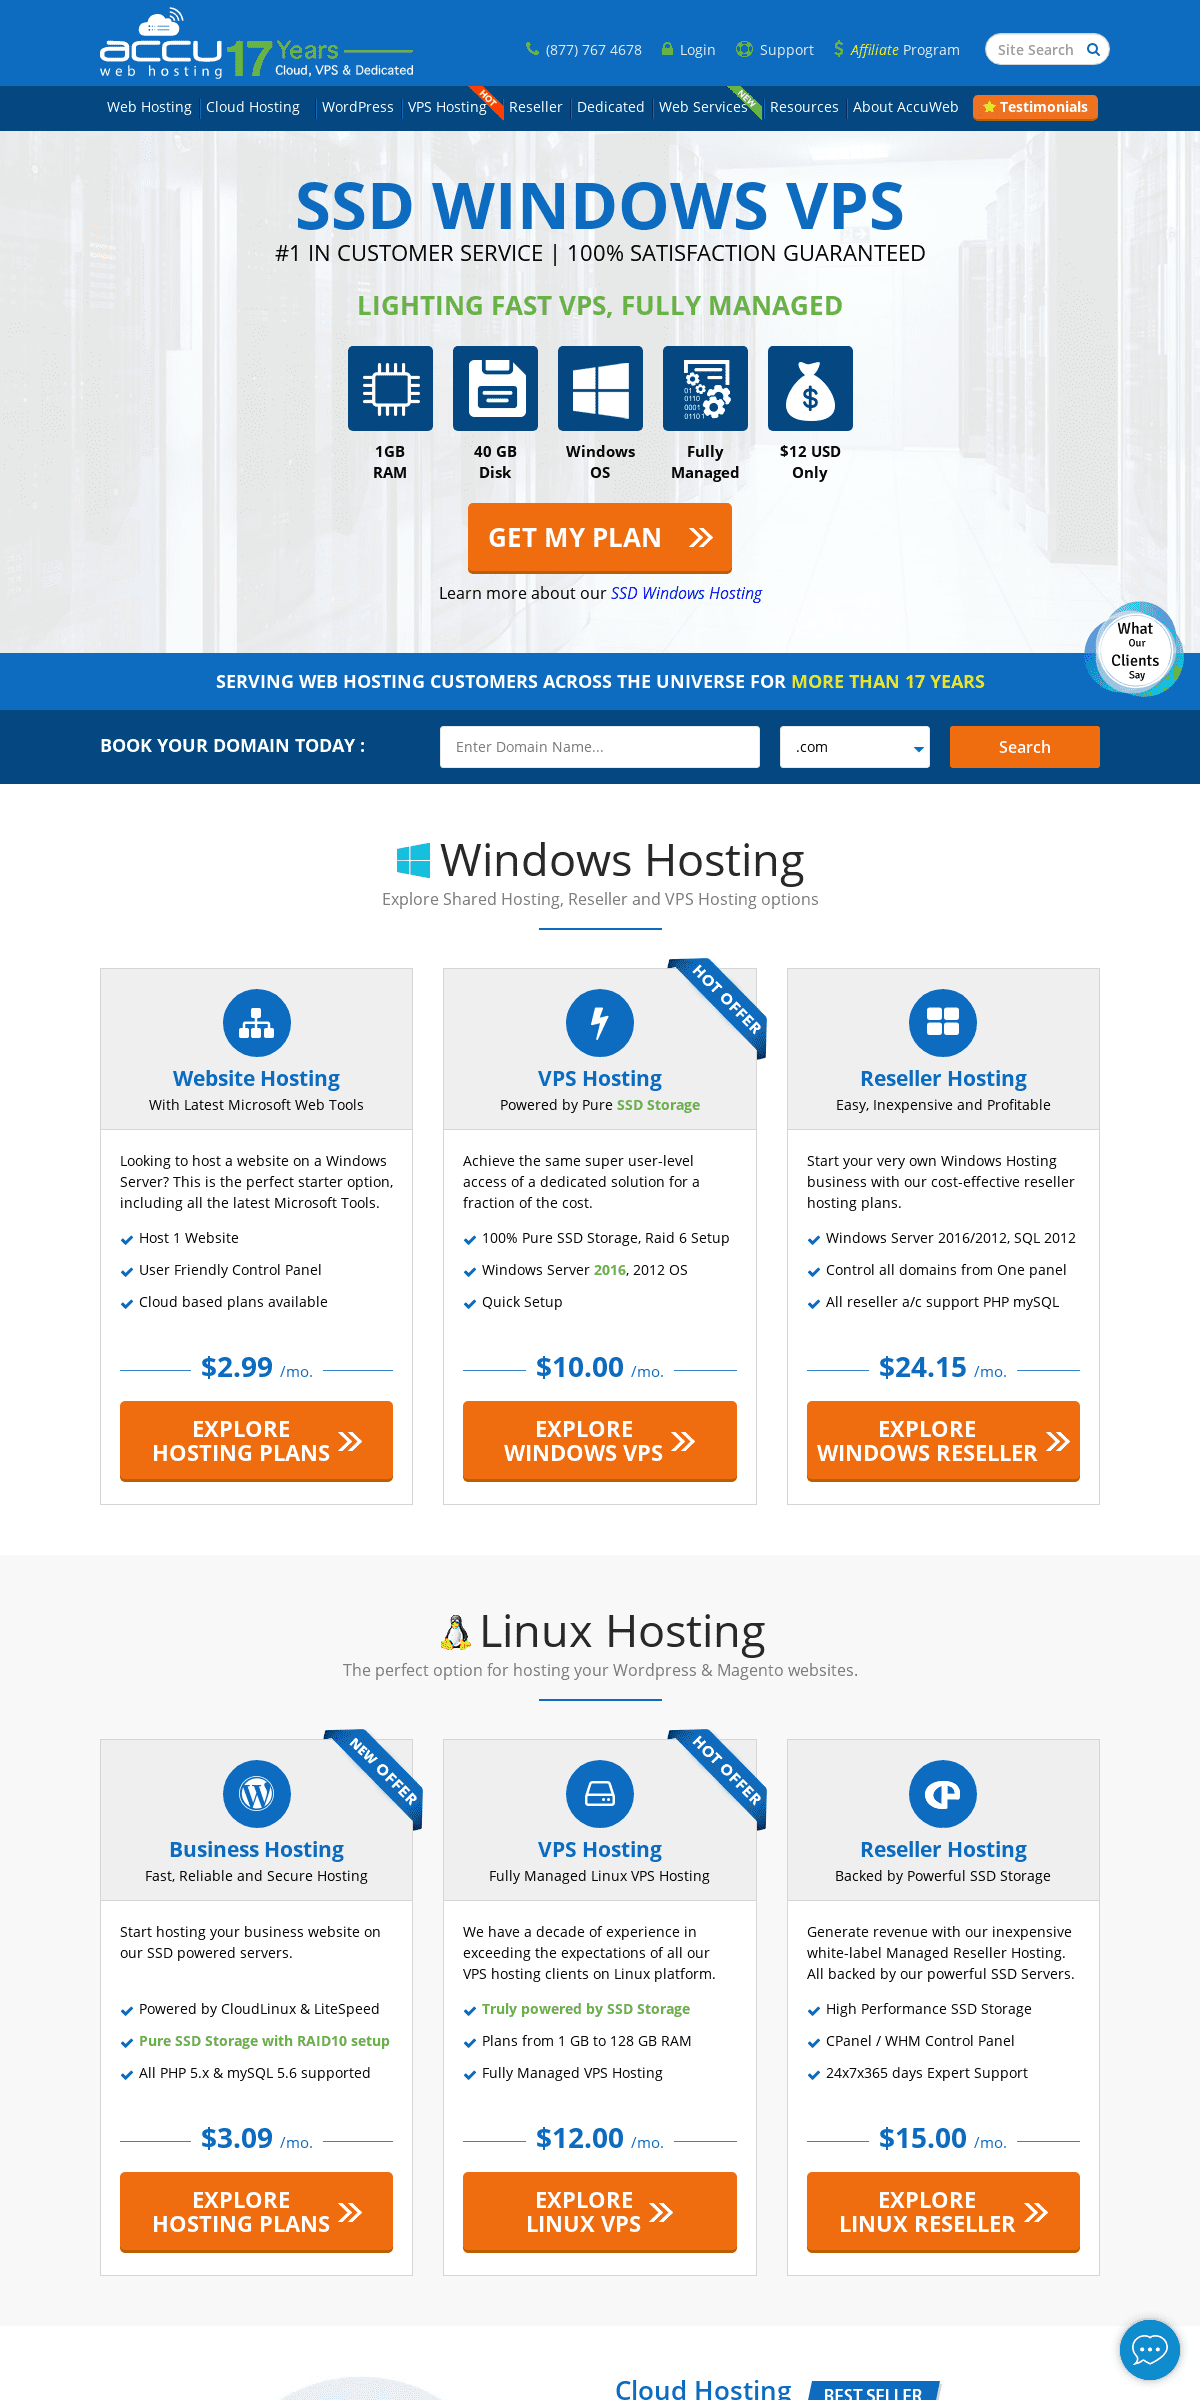 A complete backup of accuwebhosting.com